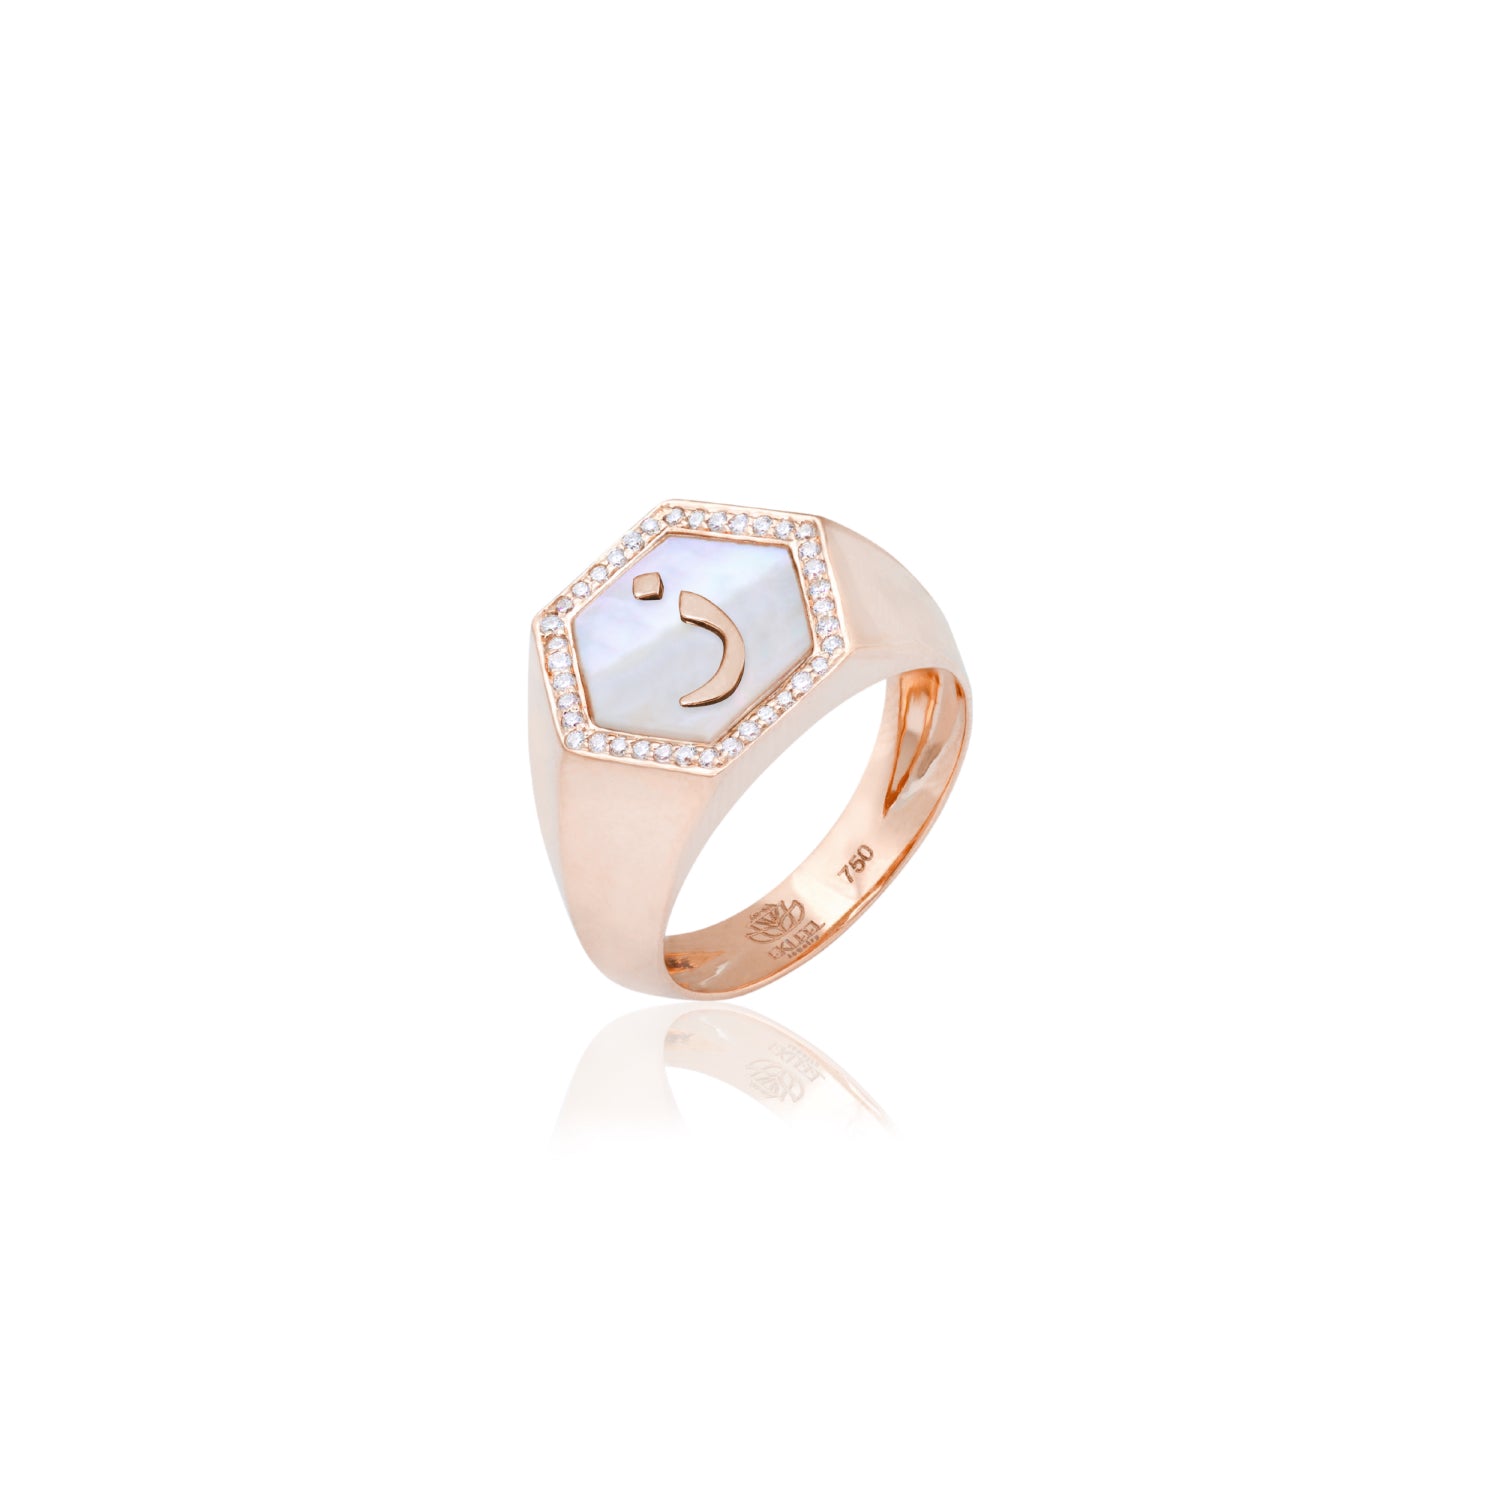 Qamoos 2.0 Letter ز White Mother of Pearl and Diamond Signet Ring in Rose Gold